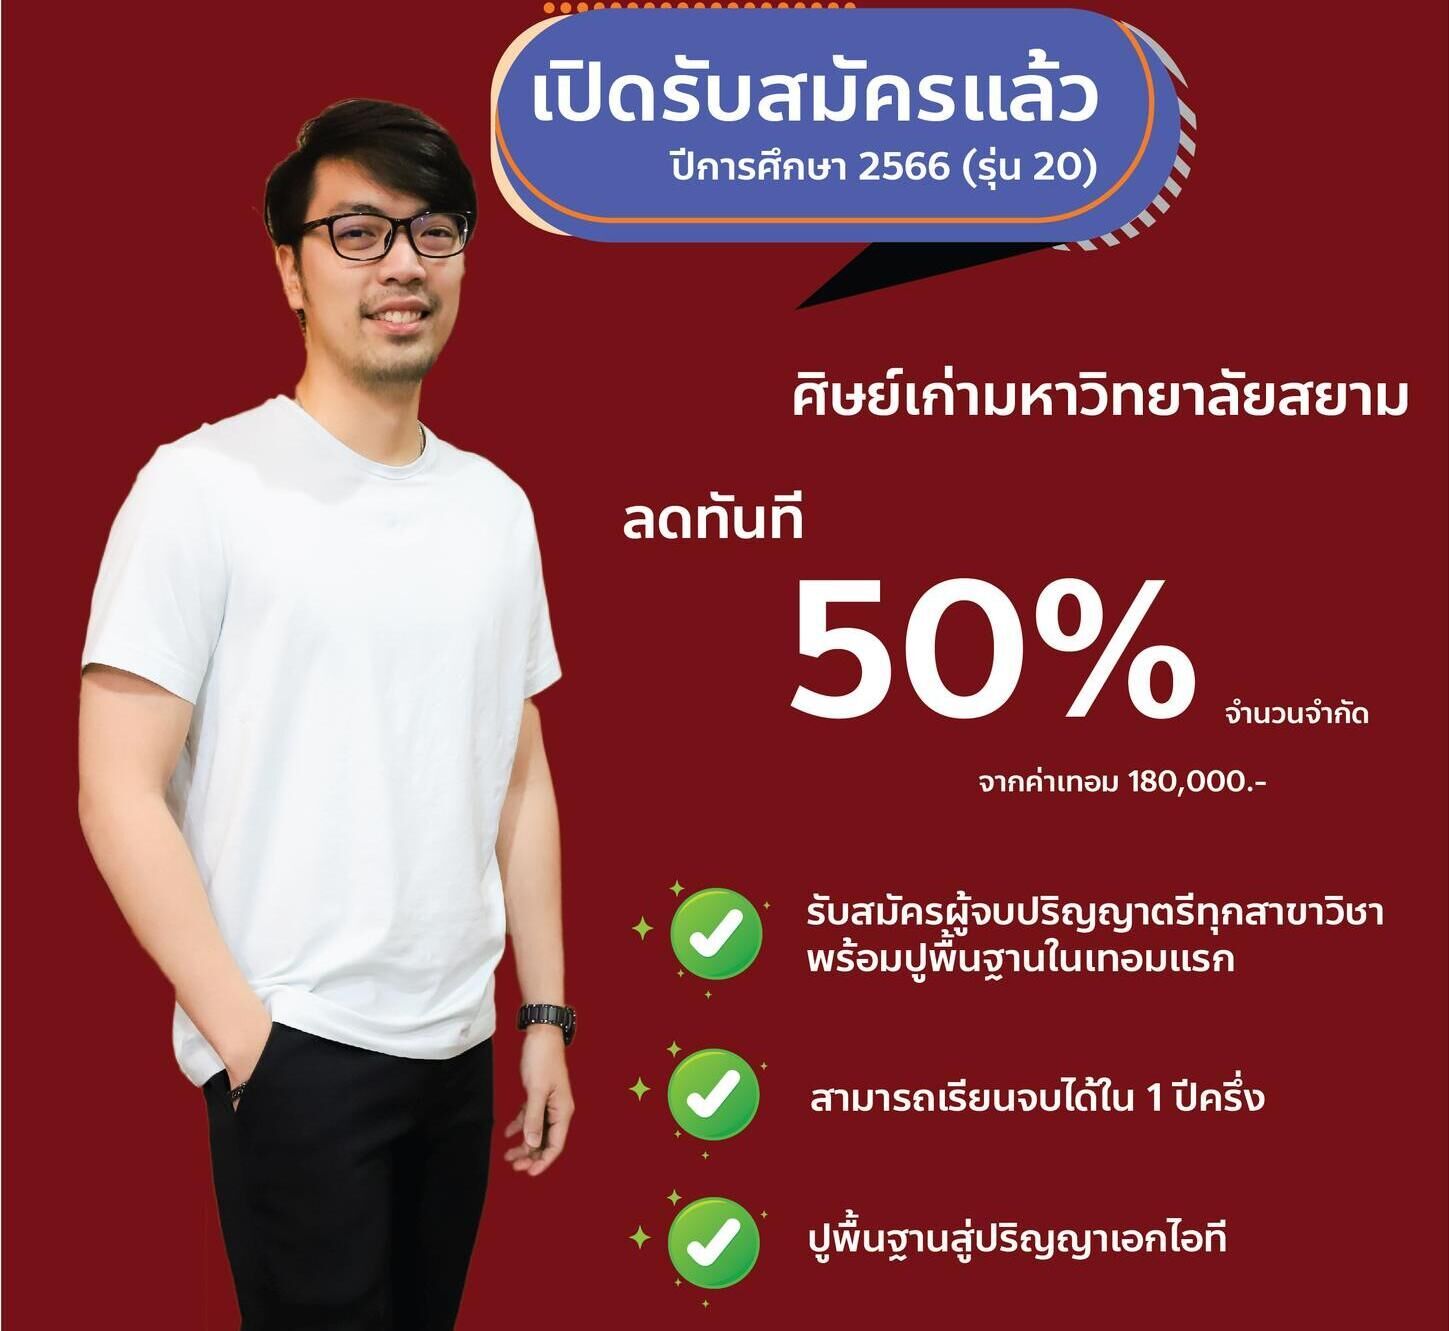 Application open with special offer for Siam University alumni, 50% less on graduate program. Limited number.